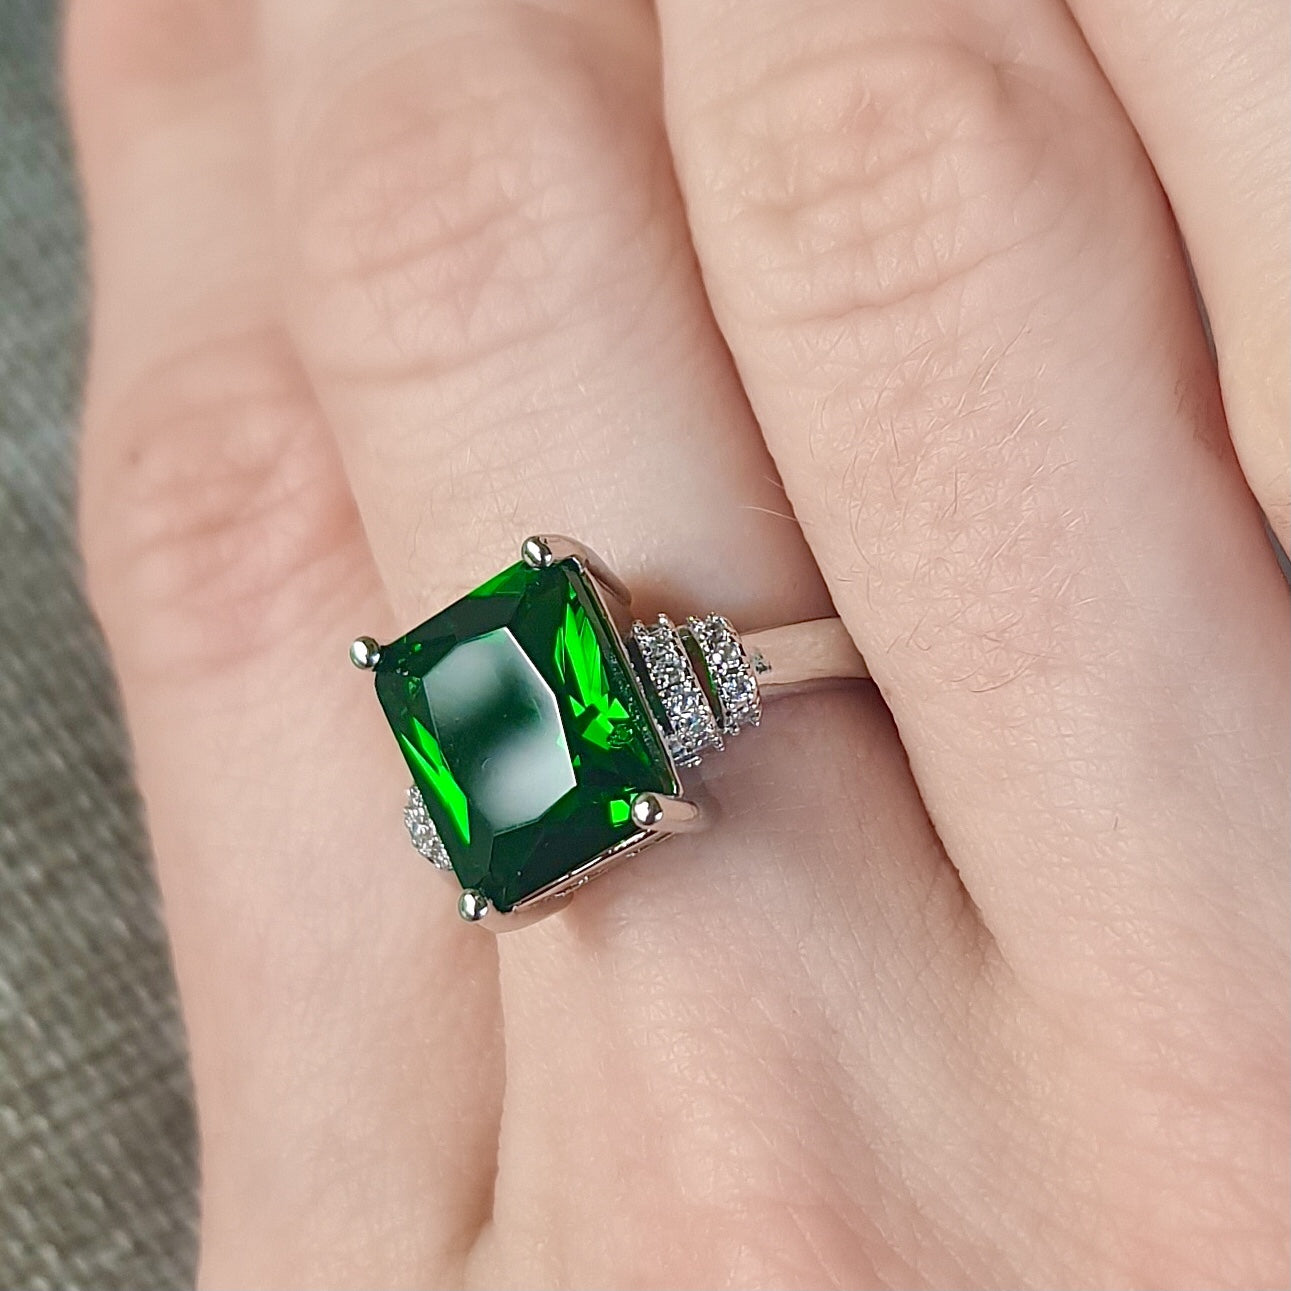 Buy 1.58tcw 14K Natural Emerald & Diamond Accent Ring, Medium Green Emerald  Cut Emerald With Round Diamond Accents, Engagement Ring in 14K Gold Online  in India - Etsy